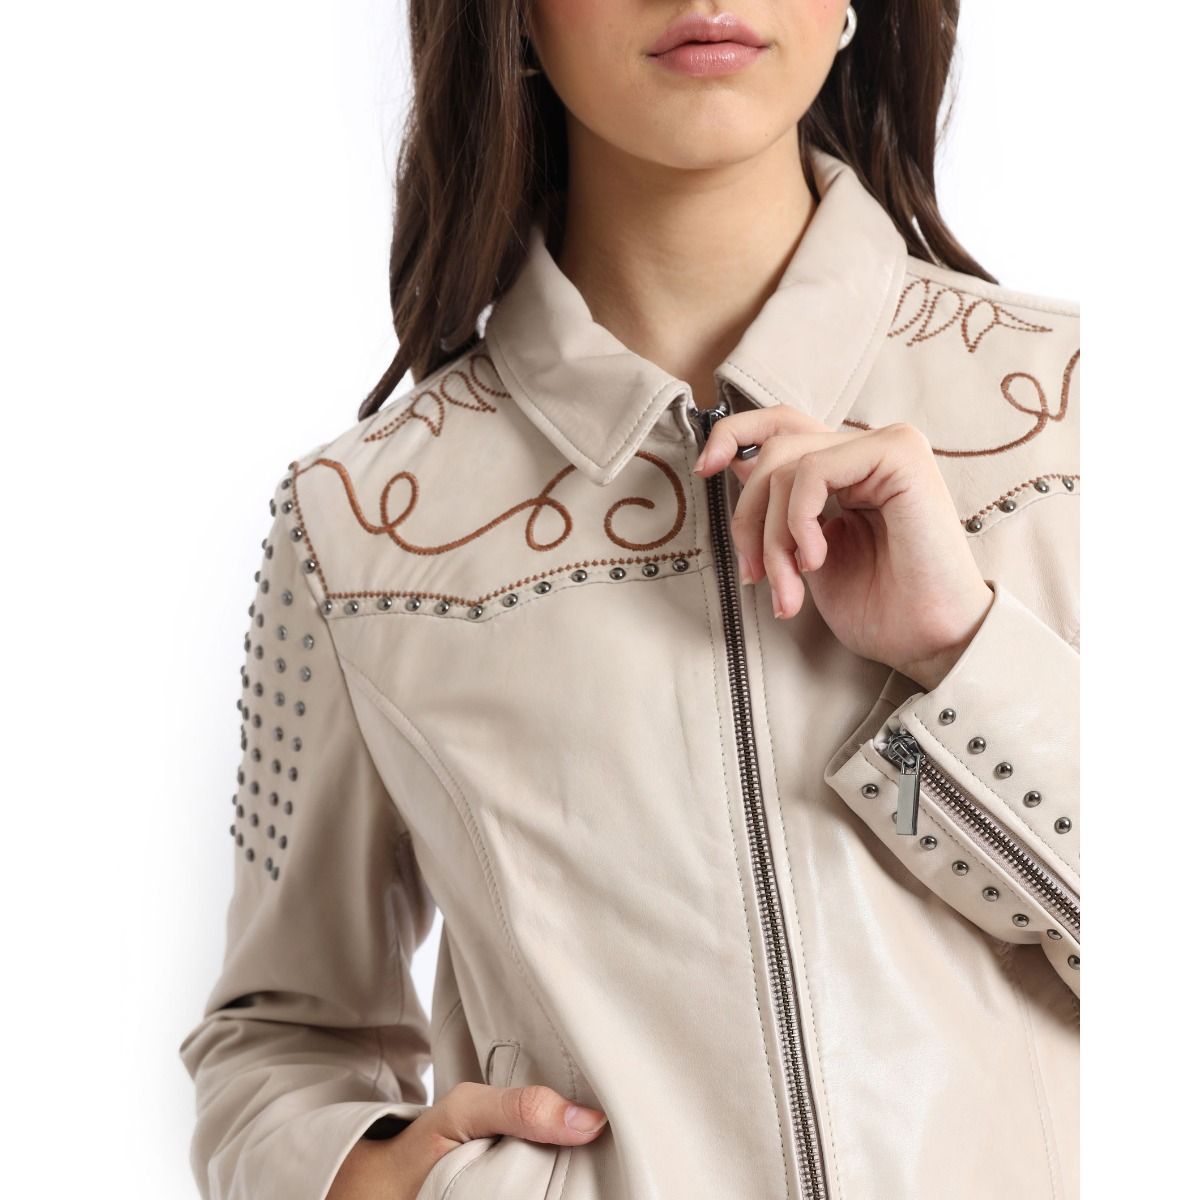 Beige Embroidered Studded Leather Jacket, Size Options